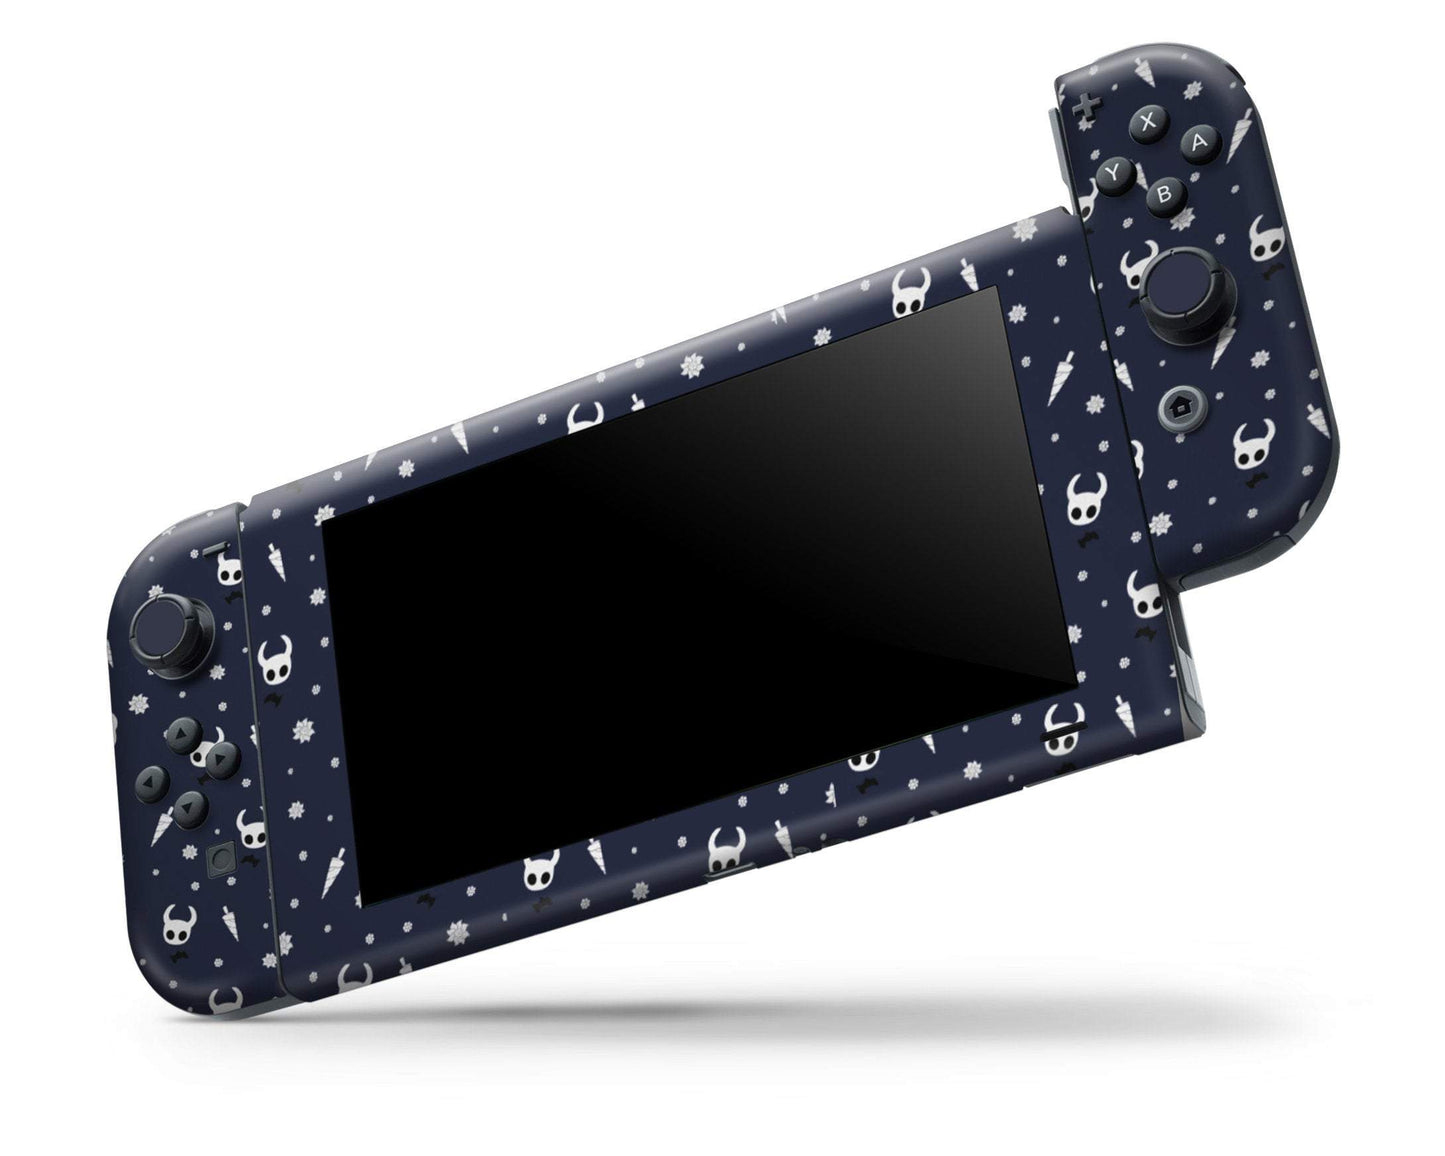 Lux Skins Nintendo Switch Hollow Knight Navy Full Set Skins - Pop culture Hollow Knight Skin